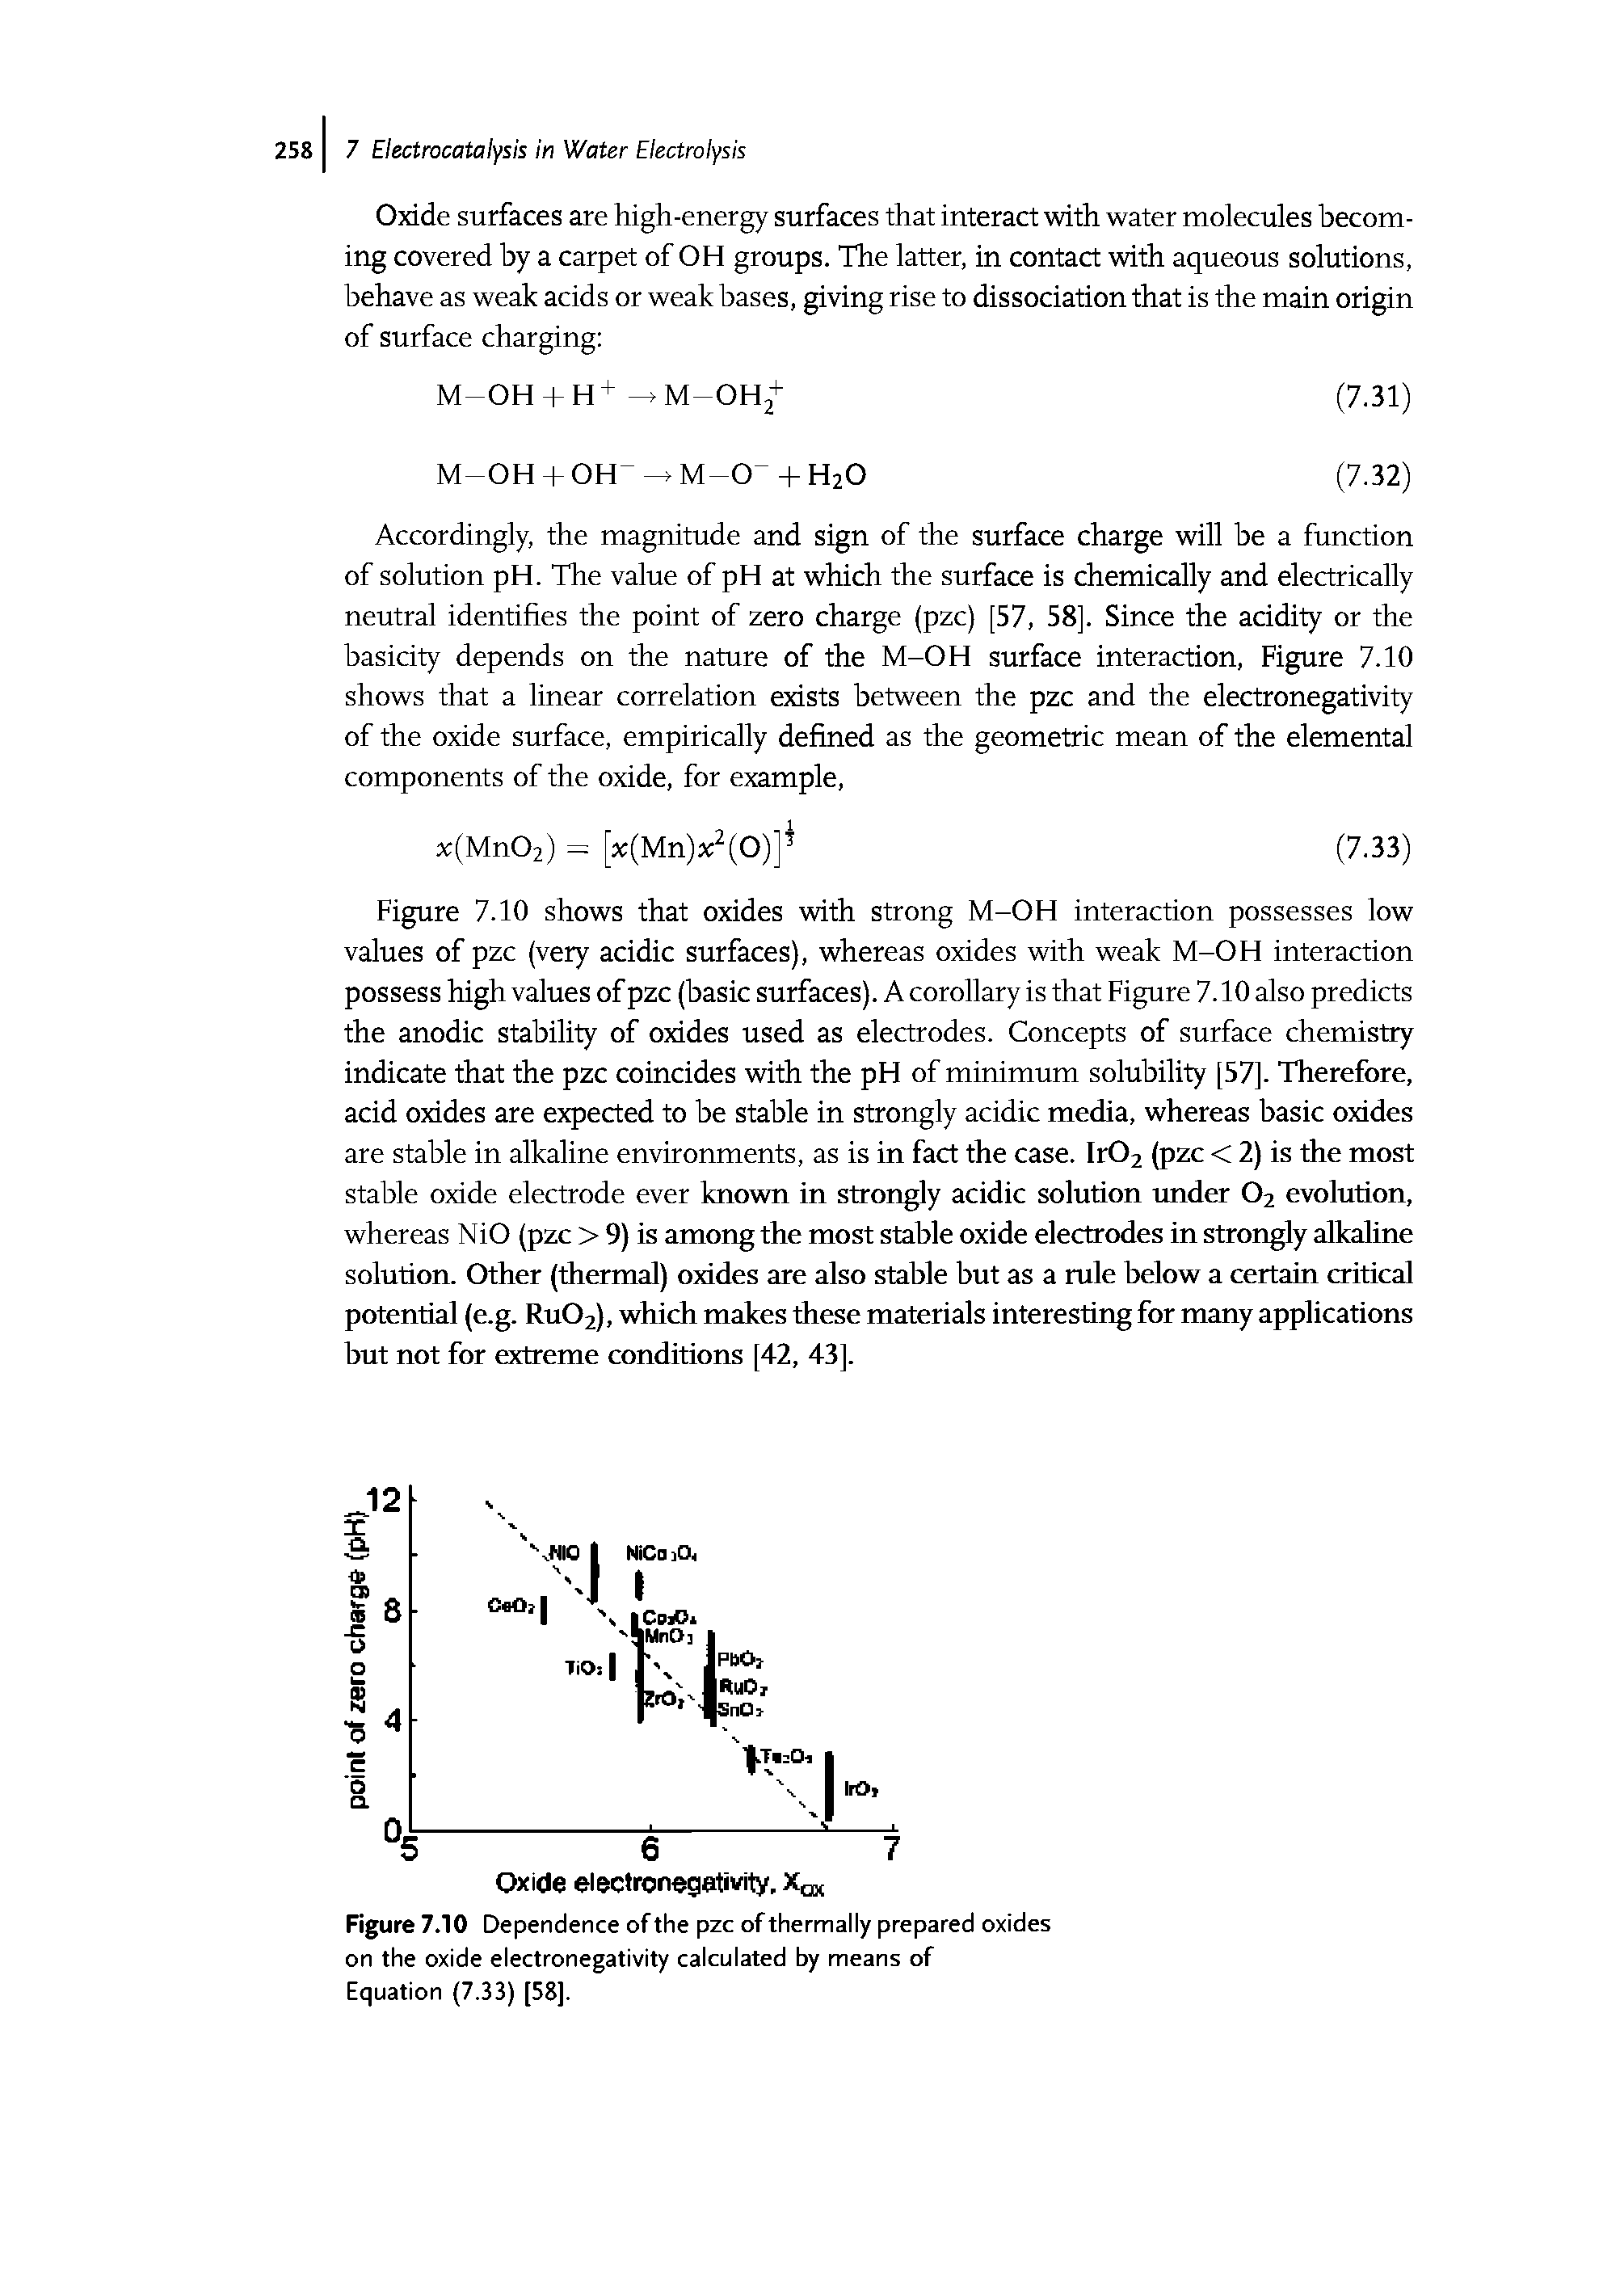 Figure 7.10 Dependence of the pzc of thermally prepared oxides on the oxide electronegativity calculated by means of Equation (7.33) [58].